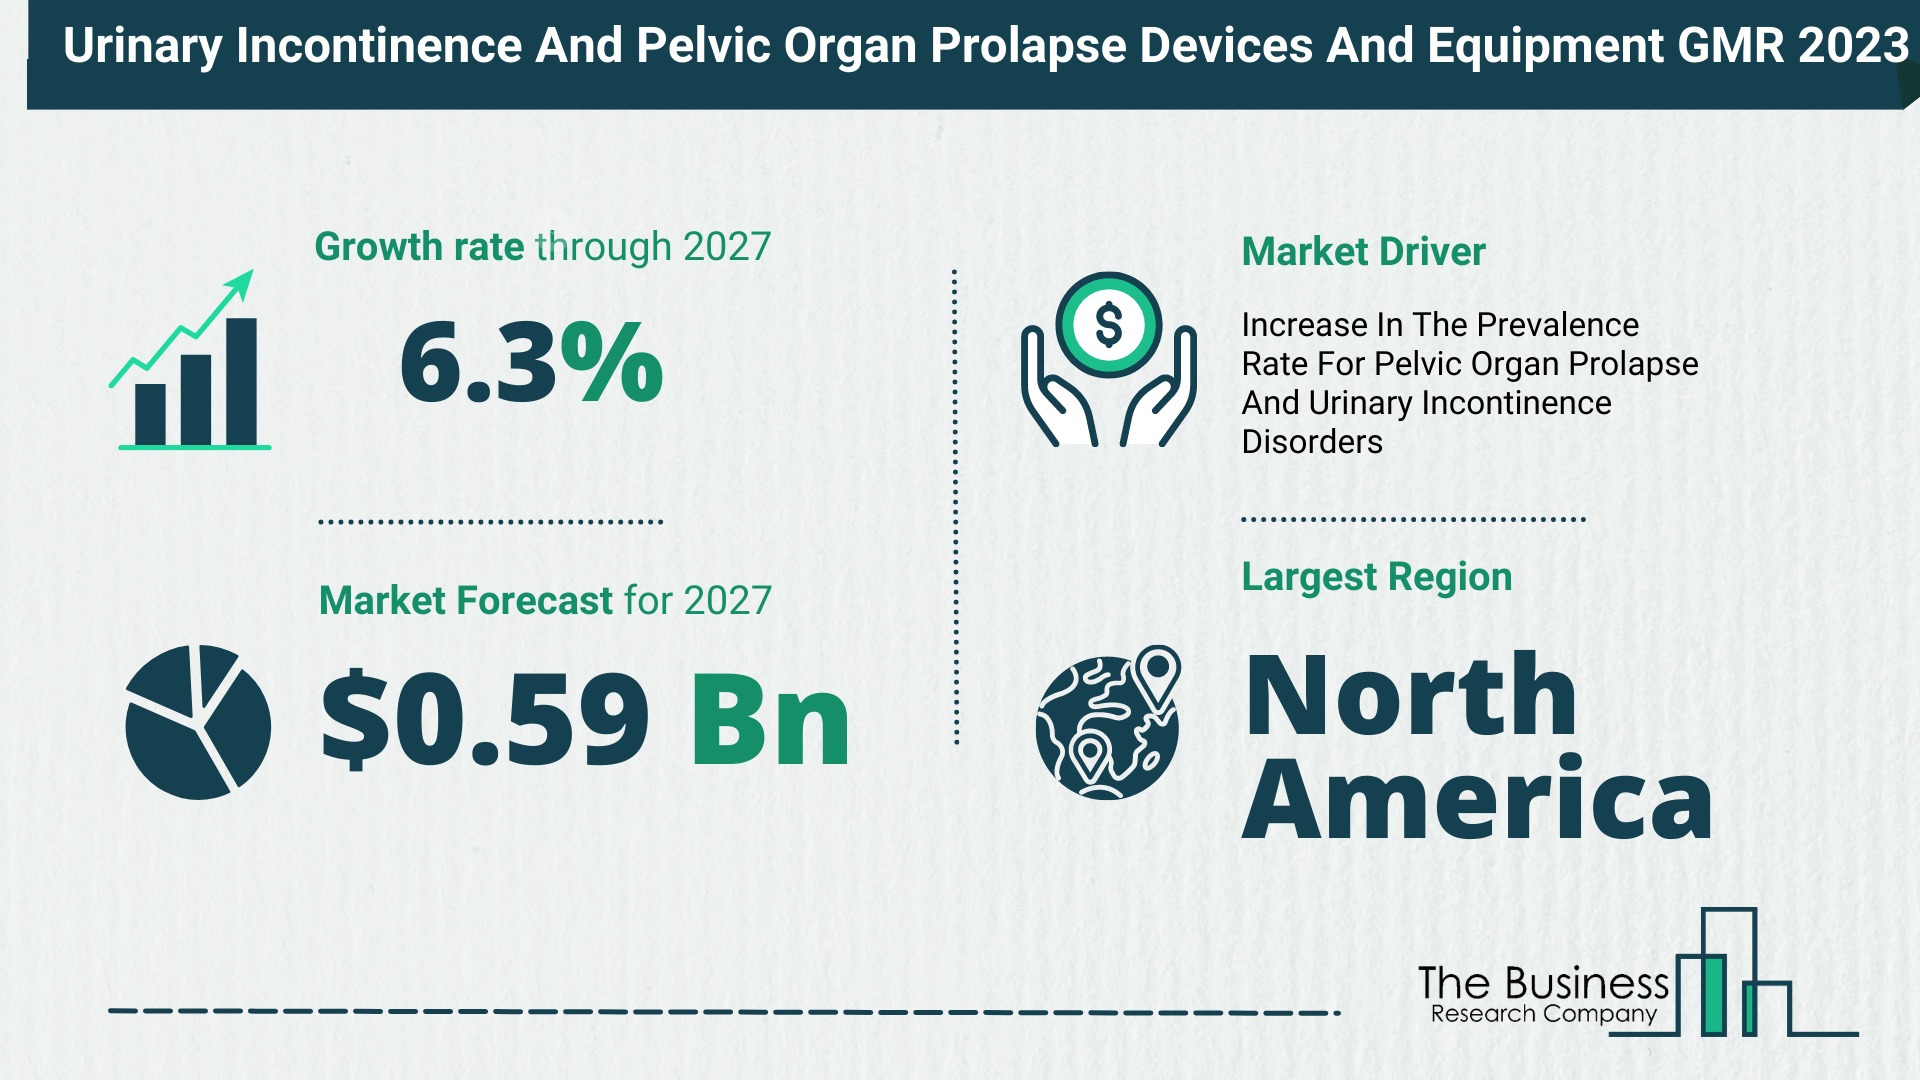 Urinary Incontinence And Pelvic Organ Prolapse Devices And Equipment Market Size